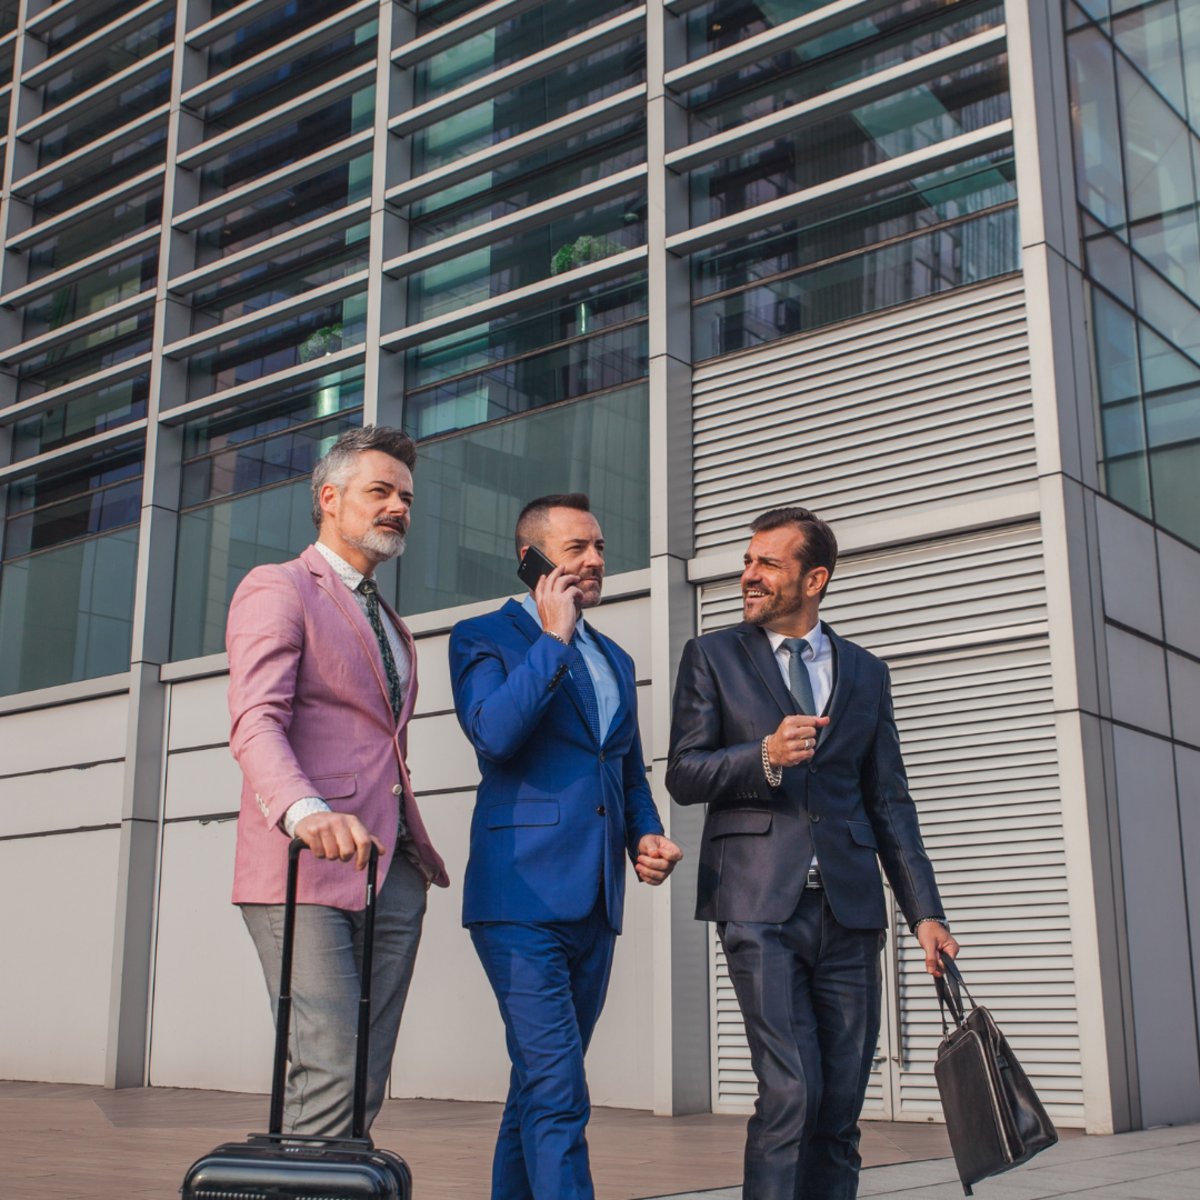 Welcome, business trailblazers! Touch down in Prescott and let the adventure begin. Unwind in style, conquer your meetings, and let us take care of the rest. Your success story starts with Best Western Prescottonian! #businesstravel #corporatetravel